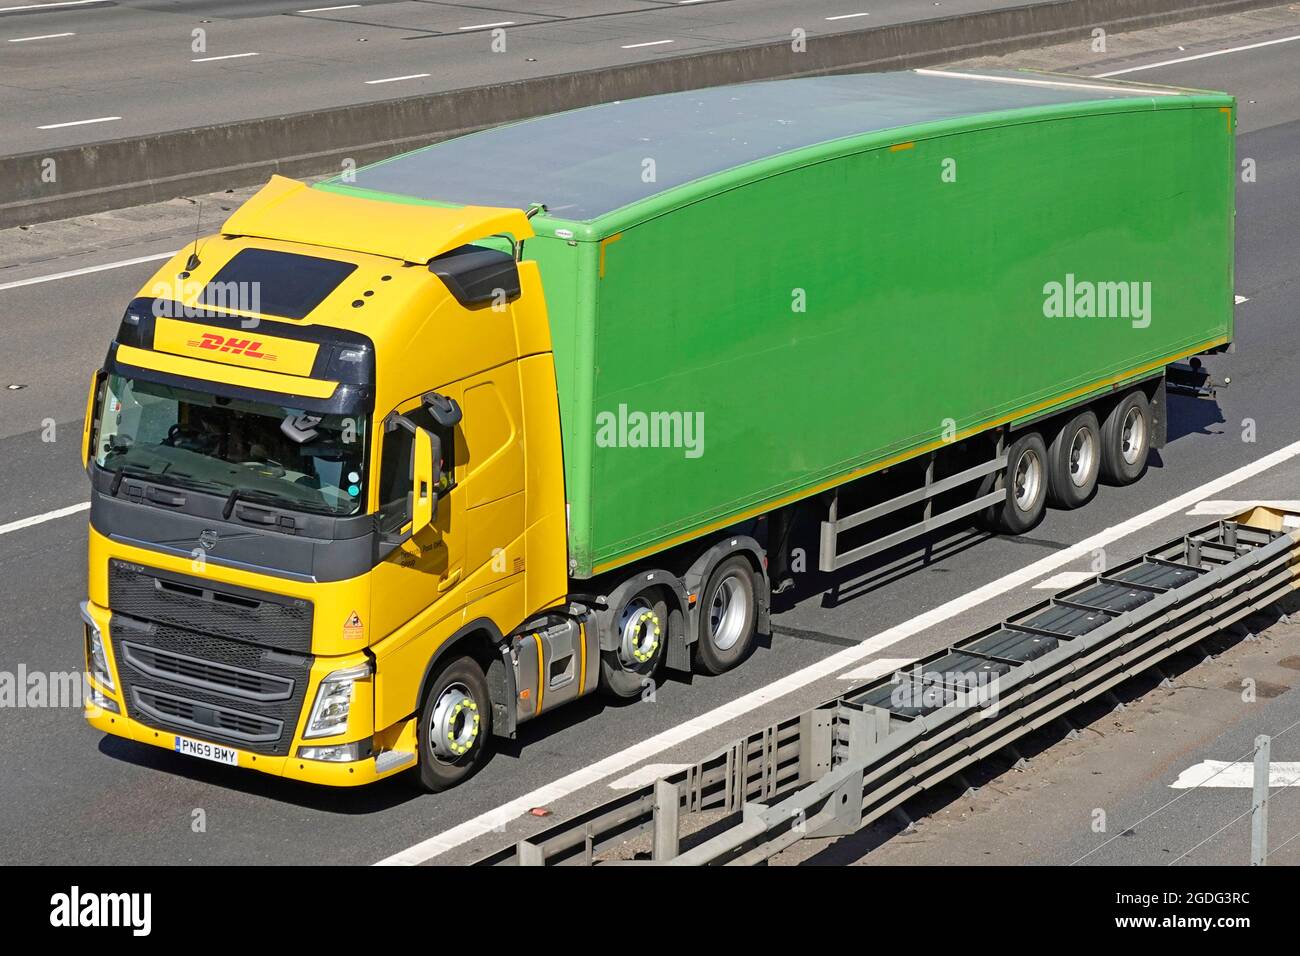 Front side & view hgv lorry truck operated by DHL a courier package delivery & express mail business towing a green unmarked articulated trailer UK Stock Photo